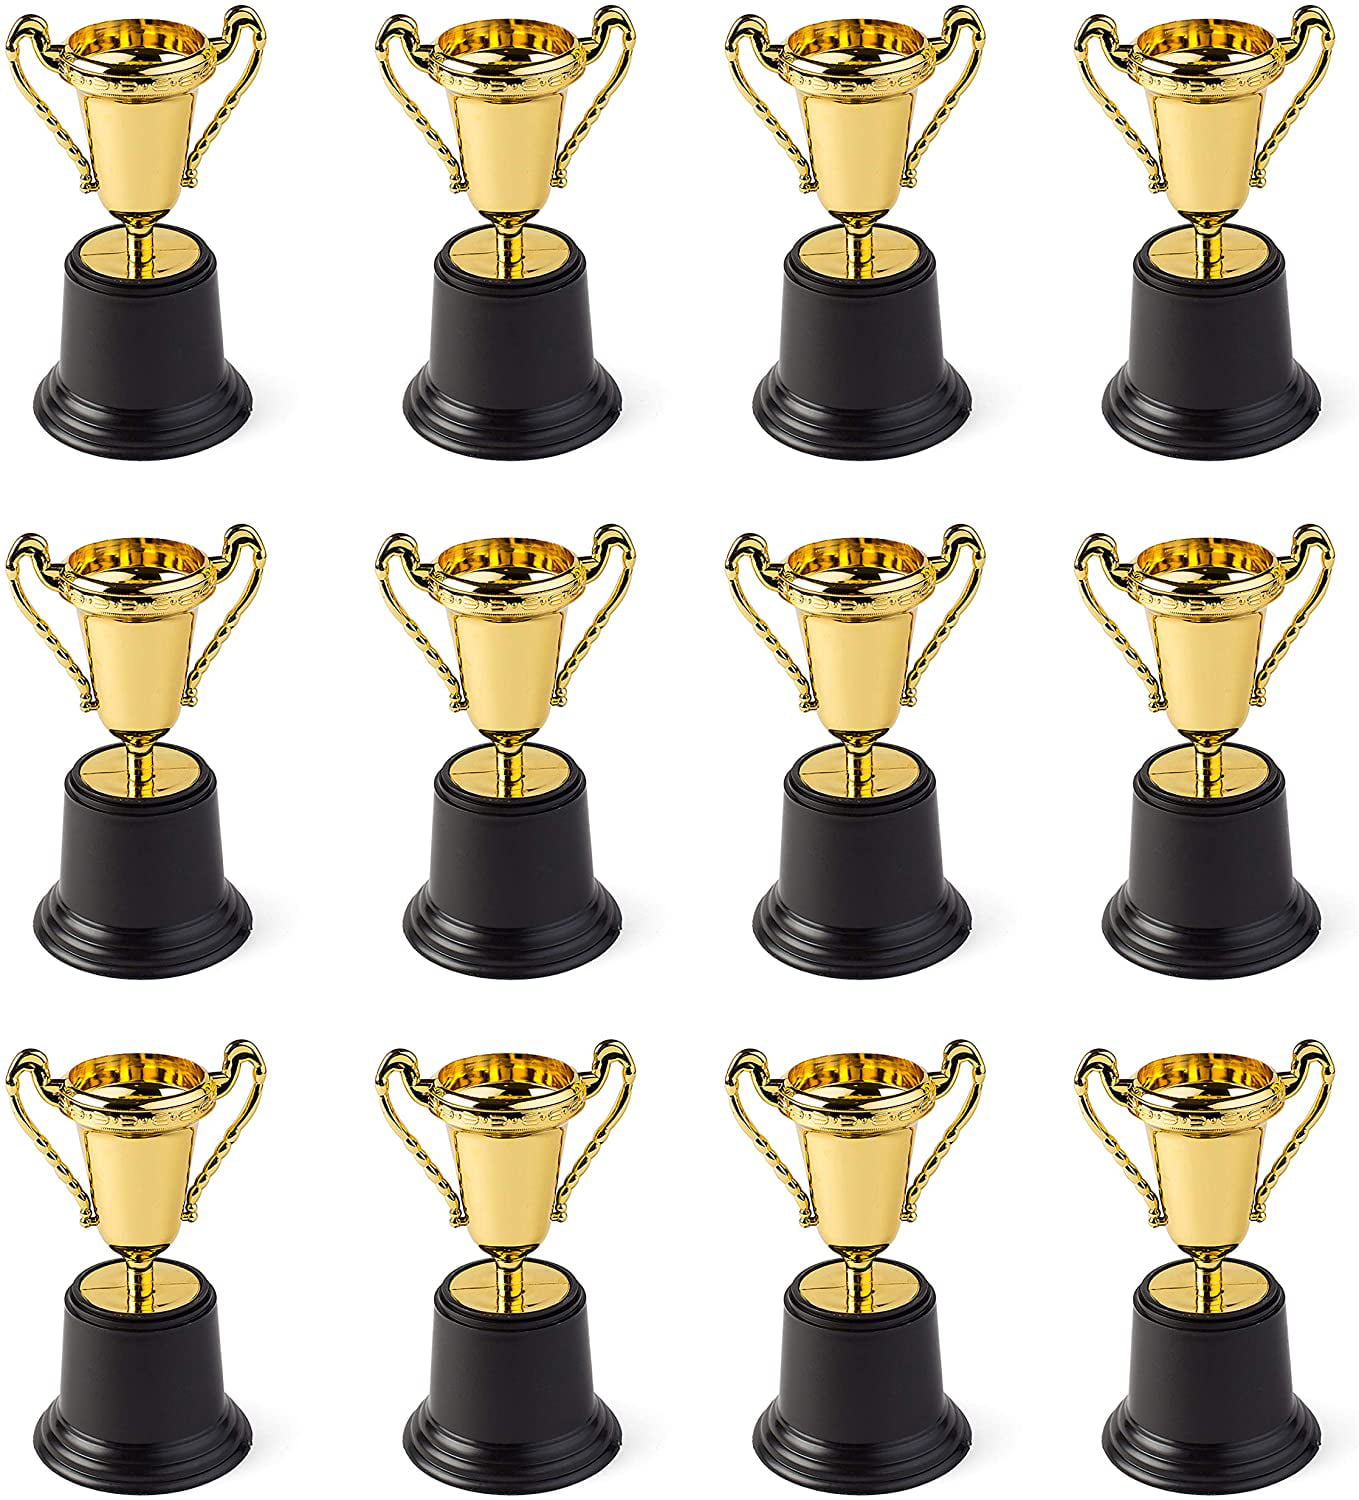 GOLD CUP CHILDS CHILDREN TROPHY ENGRAVED FREE WINNER 1ST MINI STAR TROPHIES 